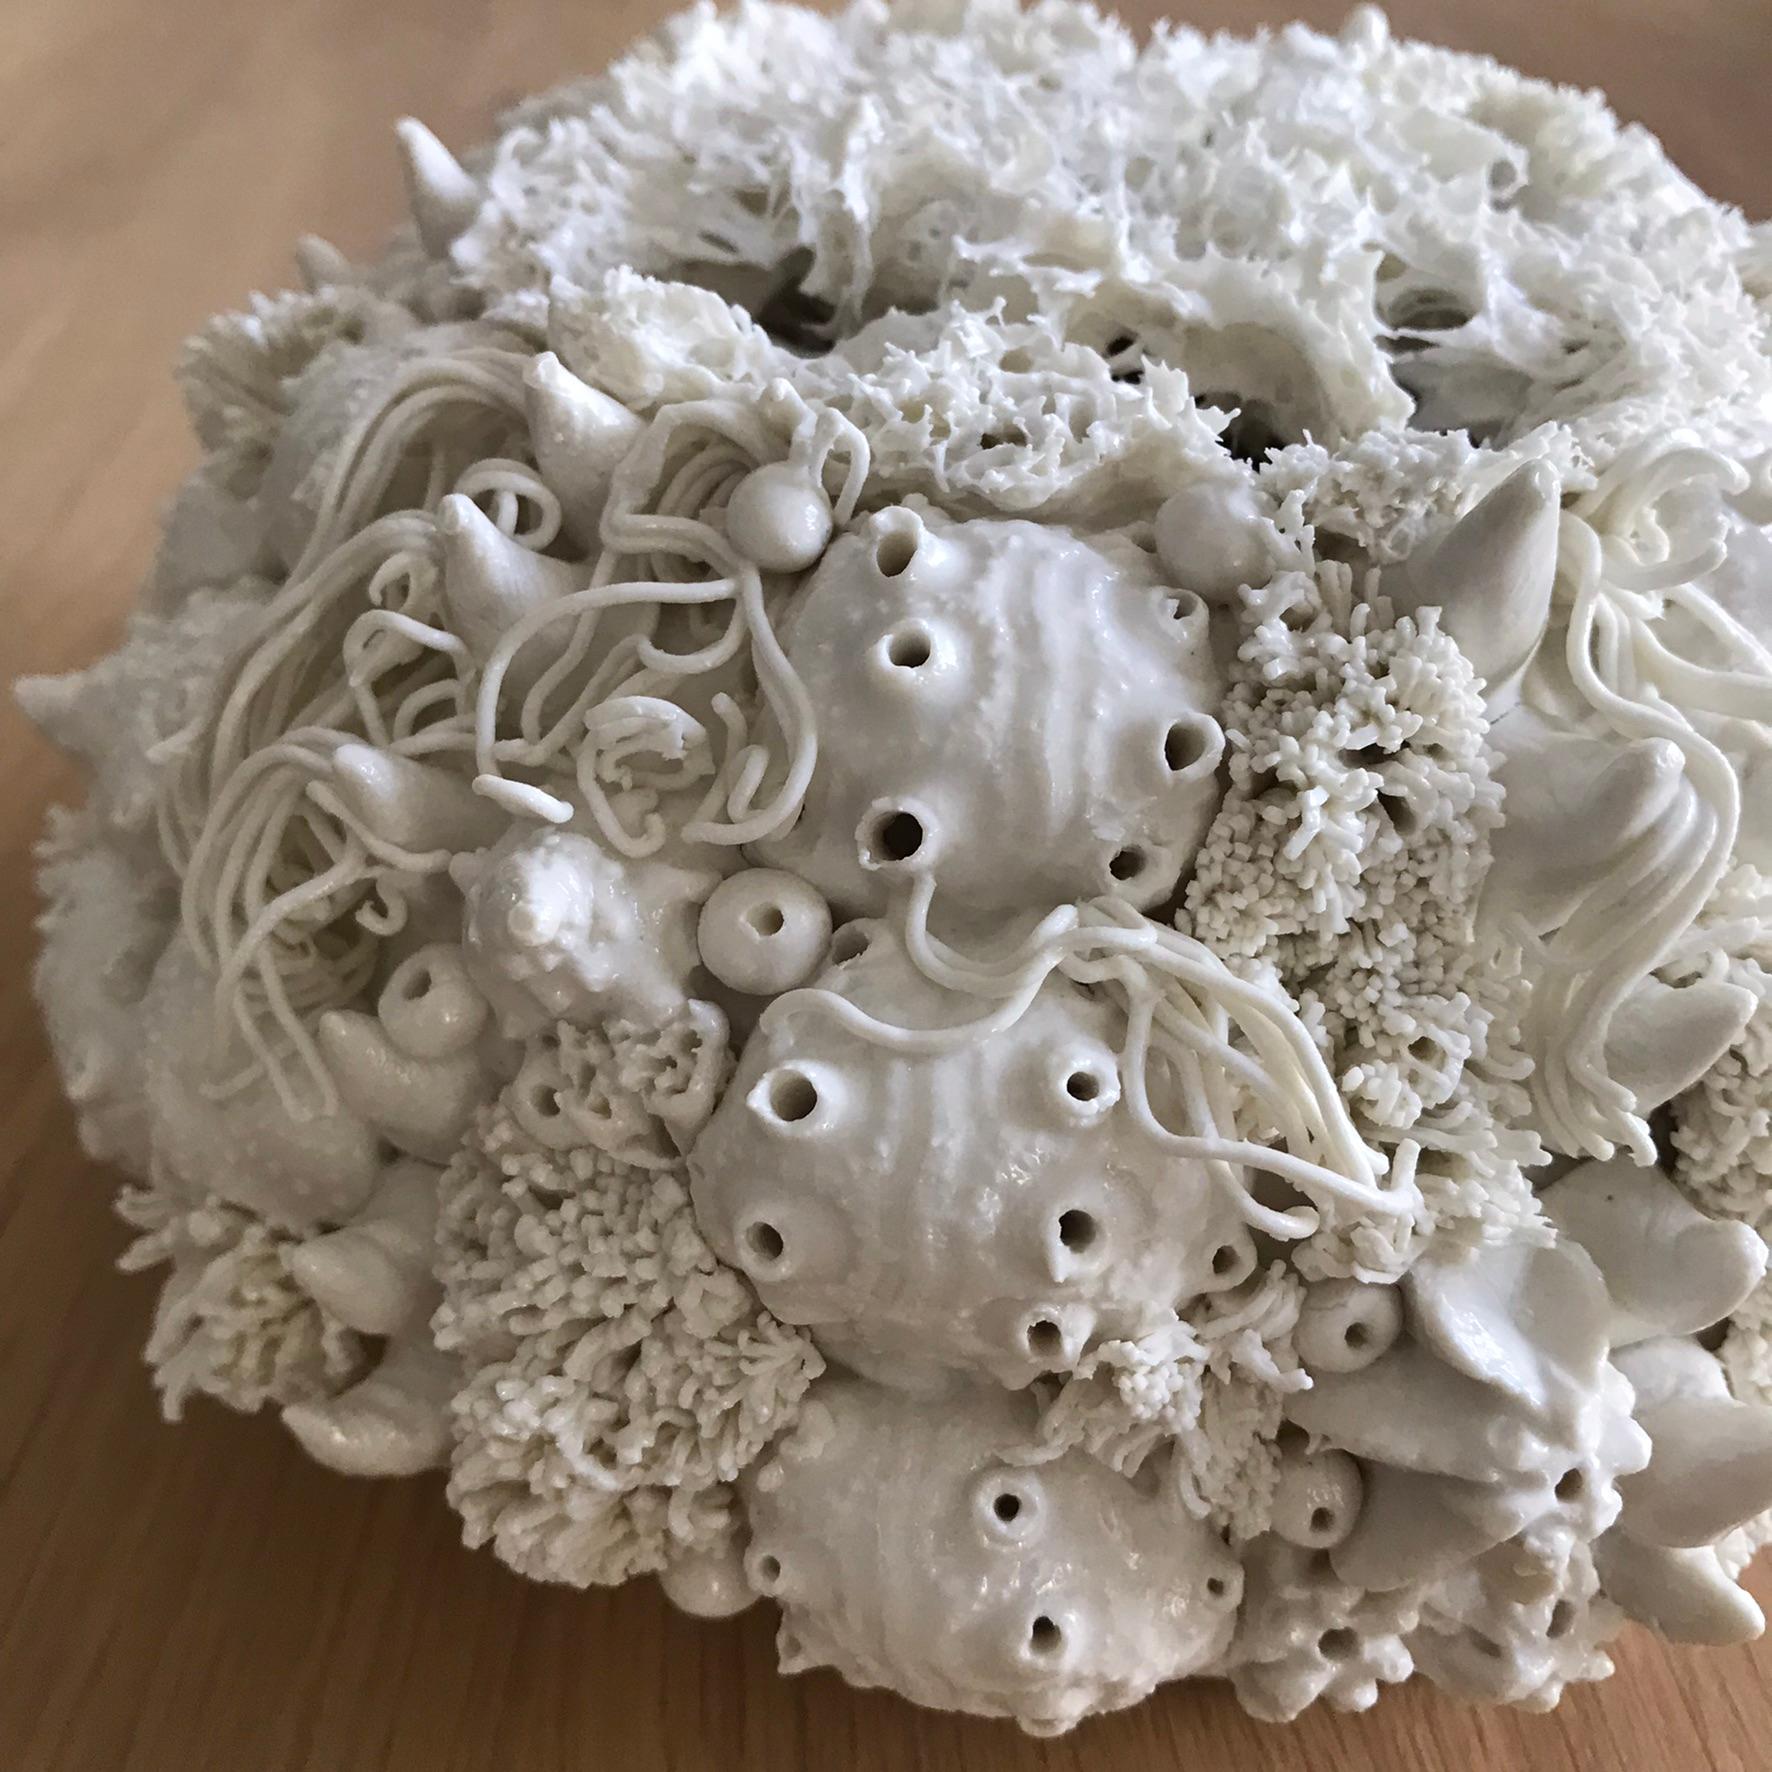 Porcelain Sculpture Lumineuse Abyss 2 For Sale